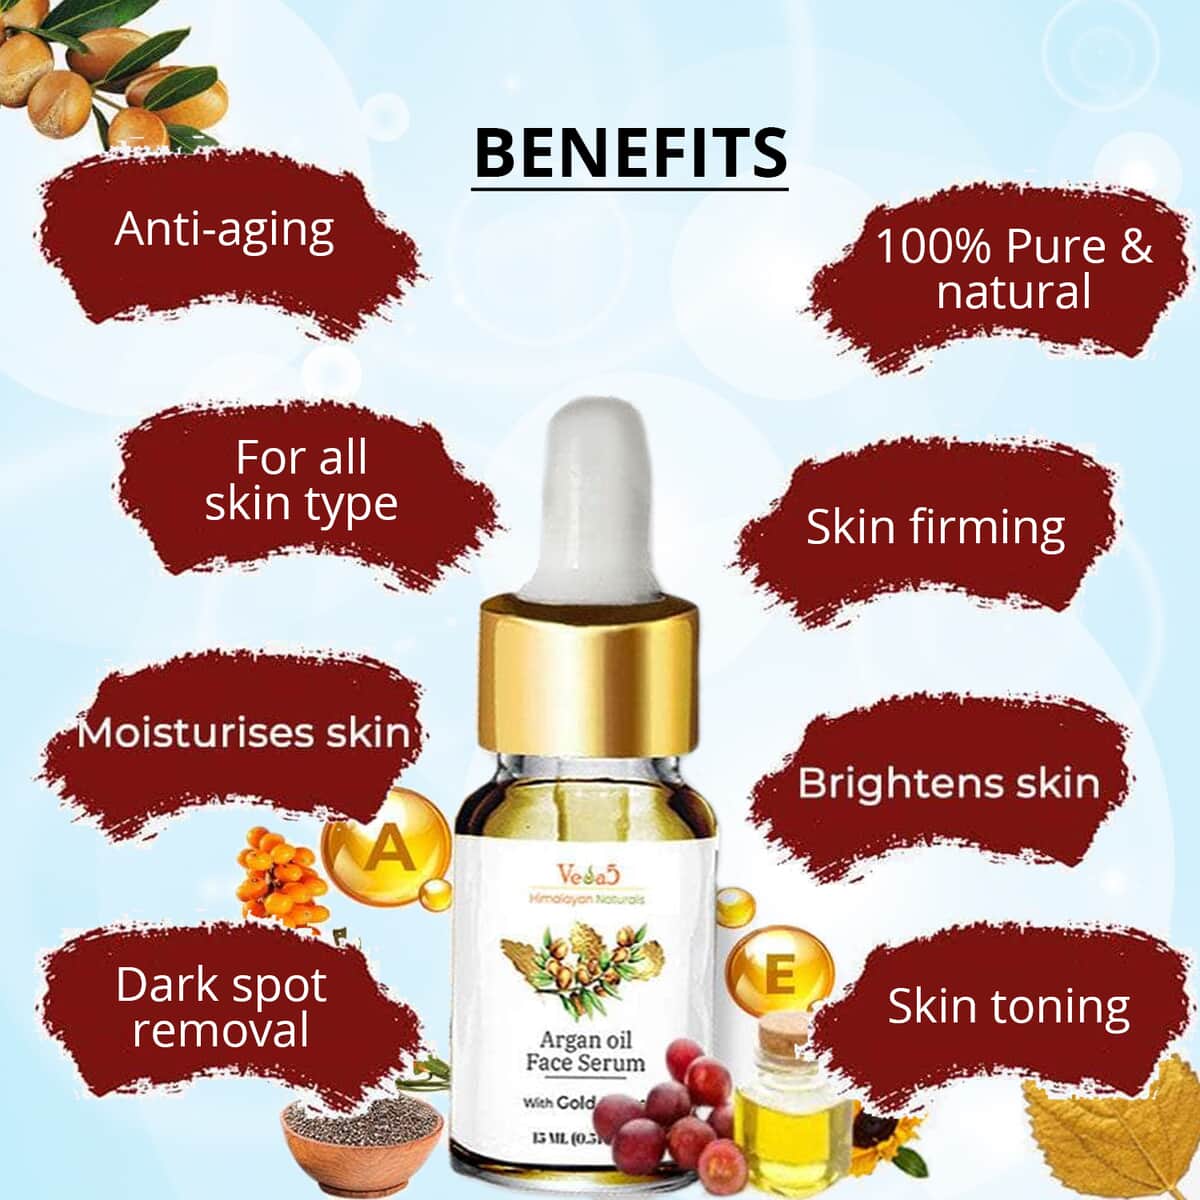 Veda5 Himalayan Naturals Argan Oil Face Serum with 24K Gold Leaves 15ml image number 2